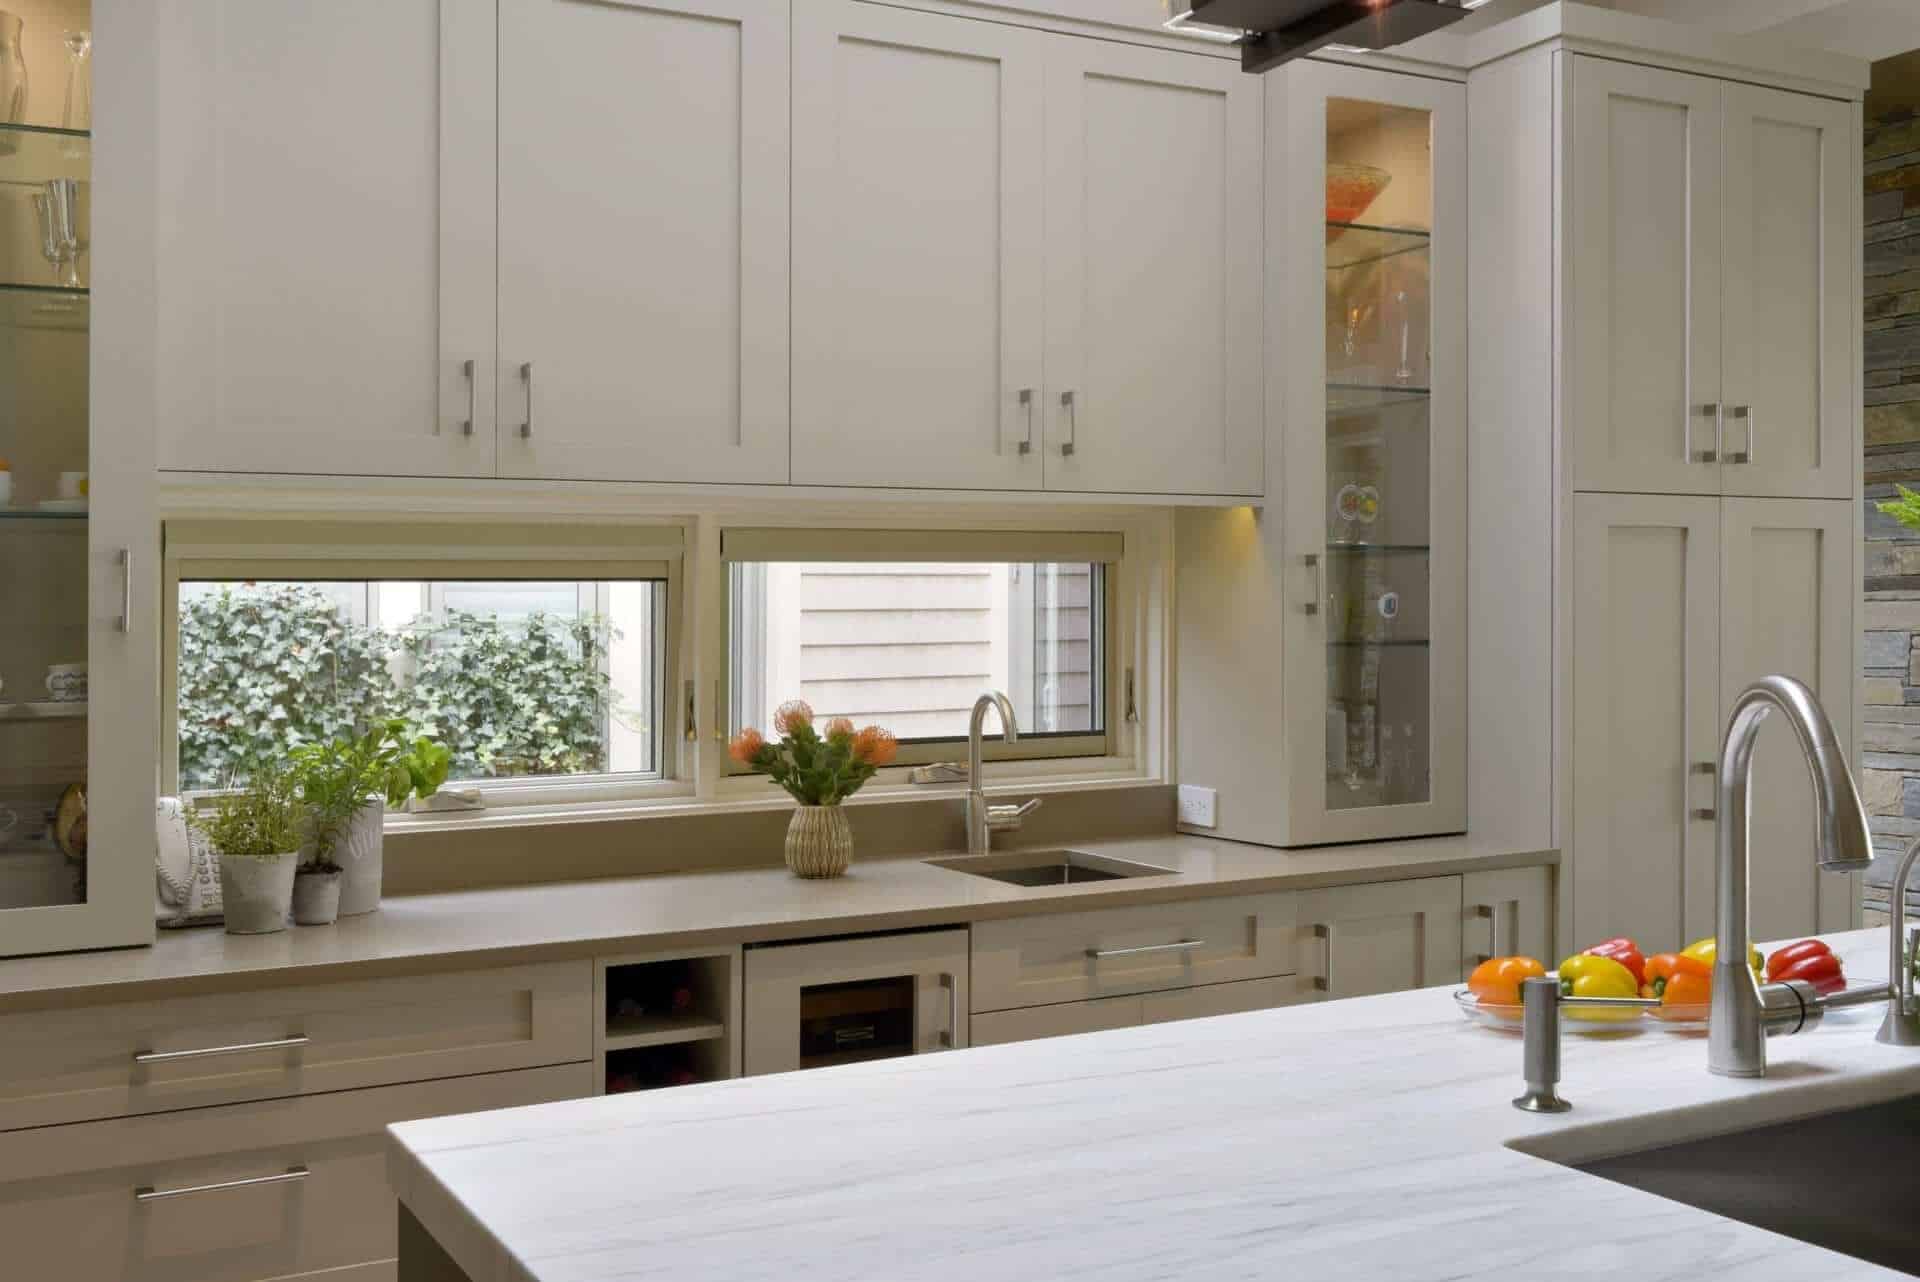 Contemporary kitchen features Rutt cabinetry in Stone with a mix of inset doors and glass front lit cabinetry.